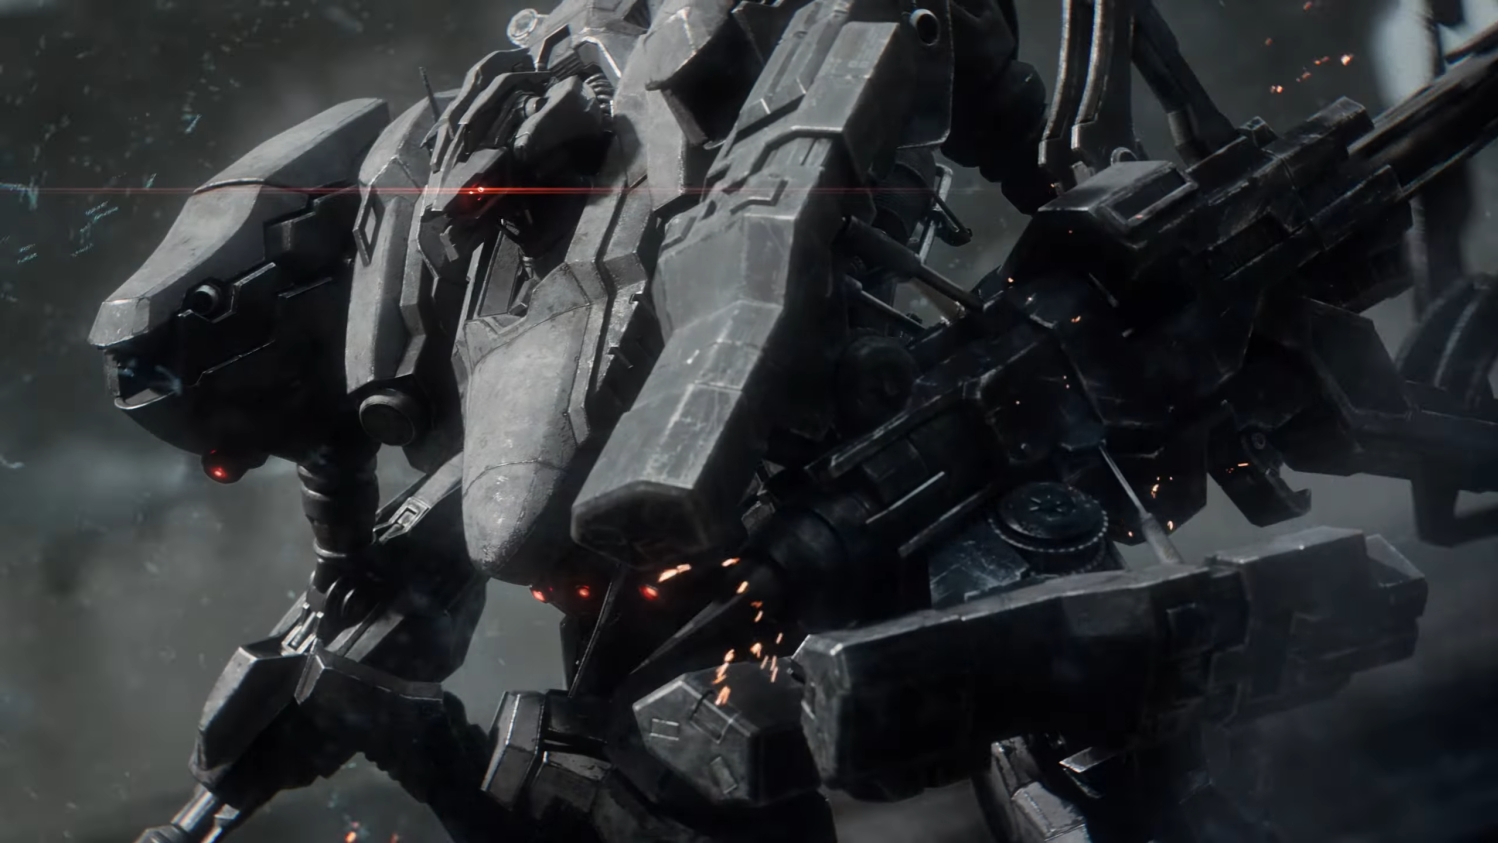 Details emerge about the next FromSoftware game after Armored Core VI -  Xfire